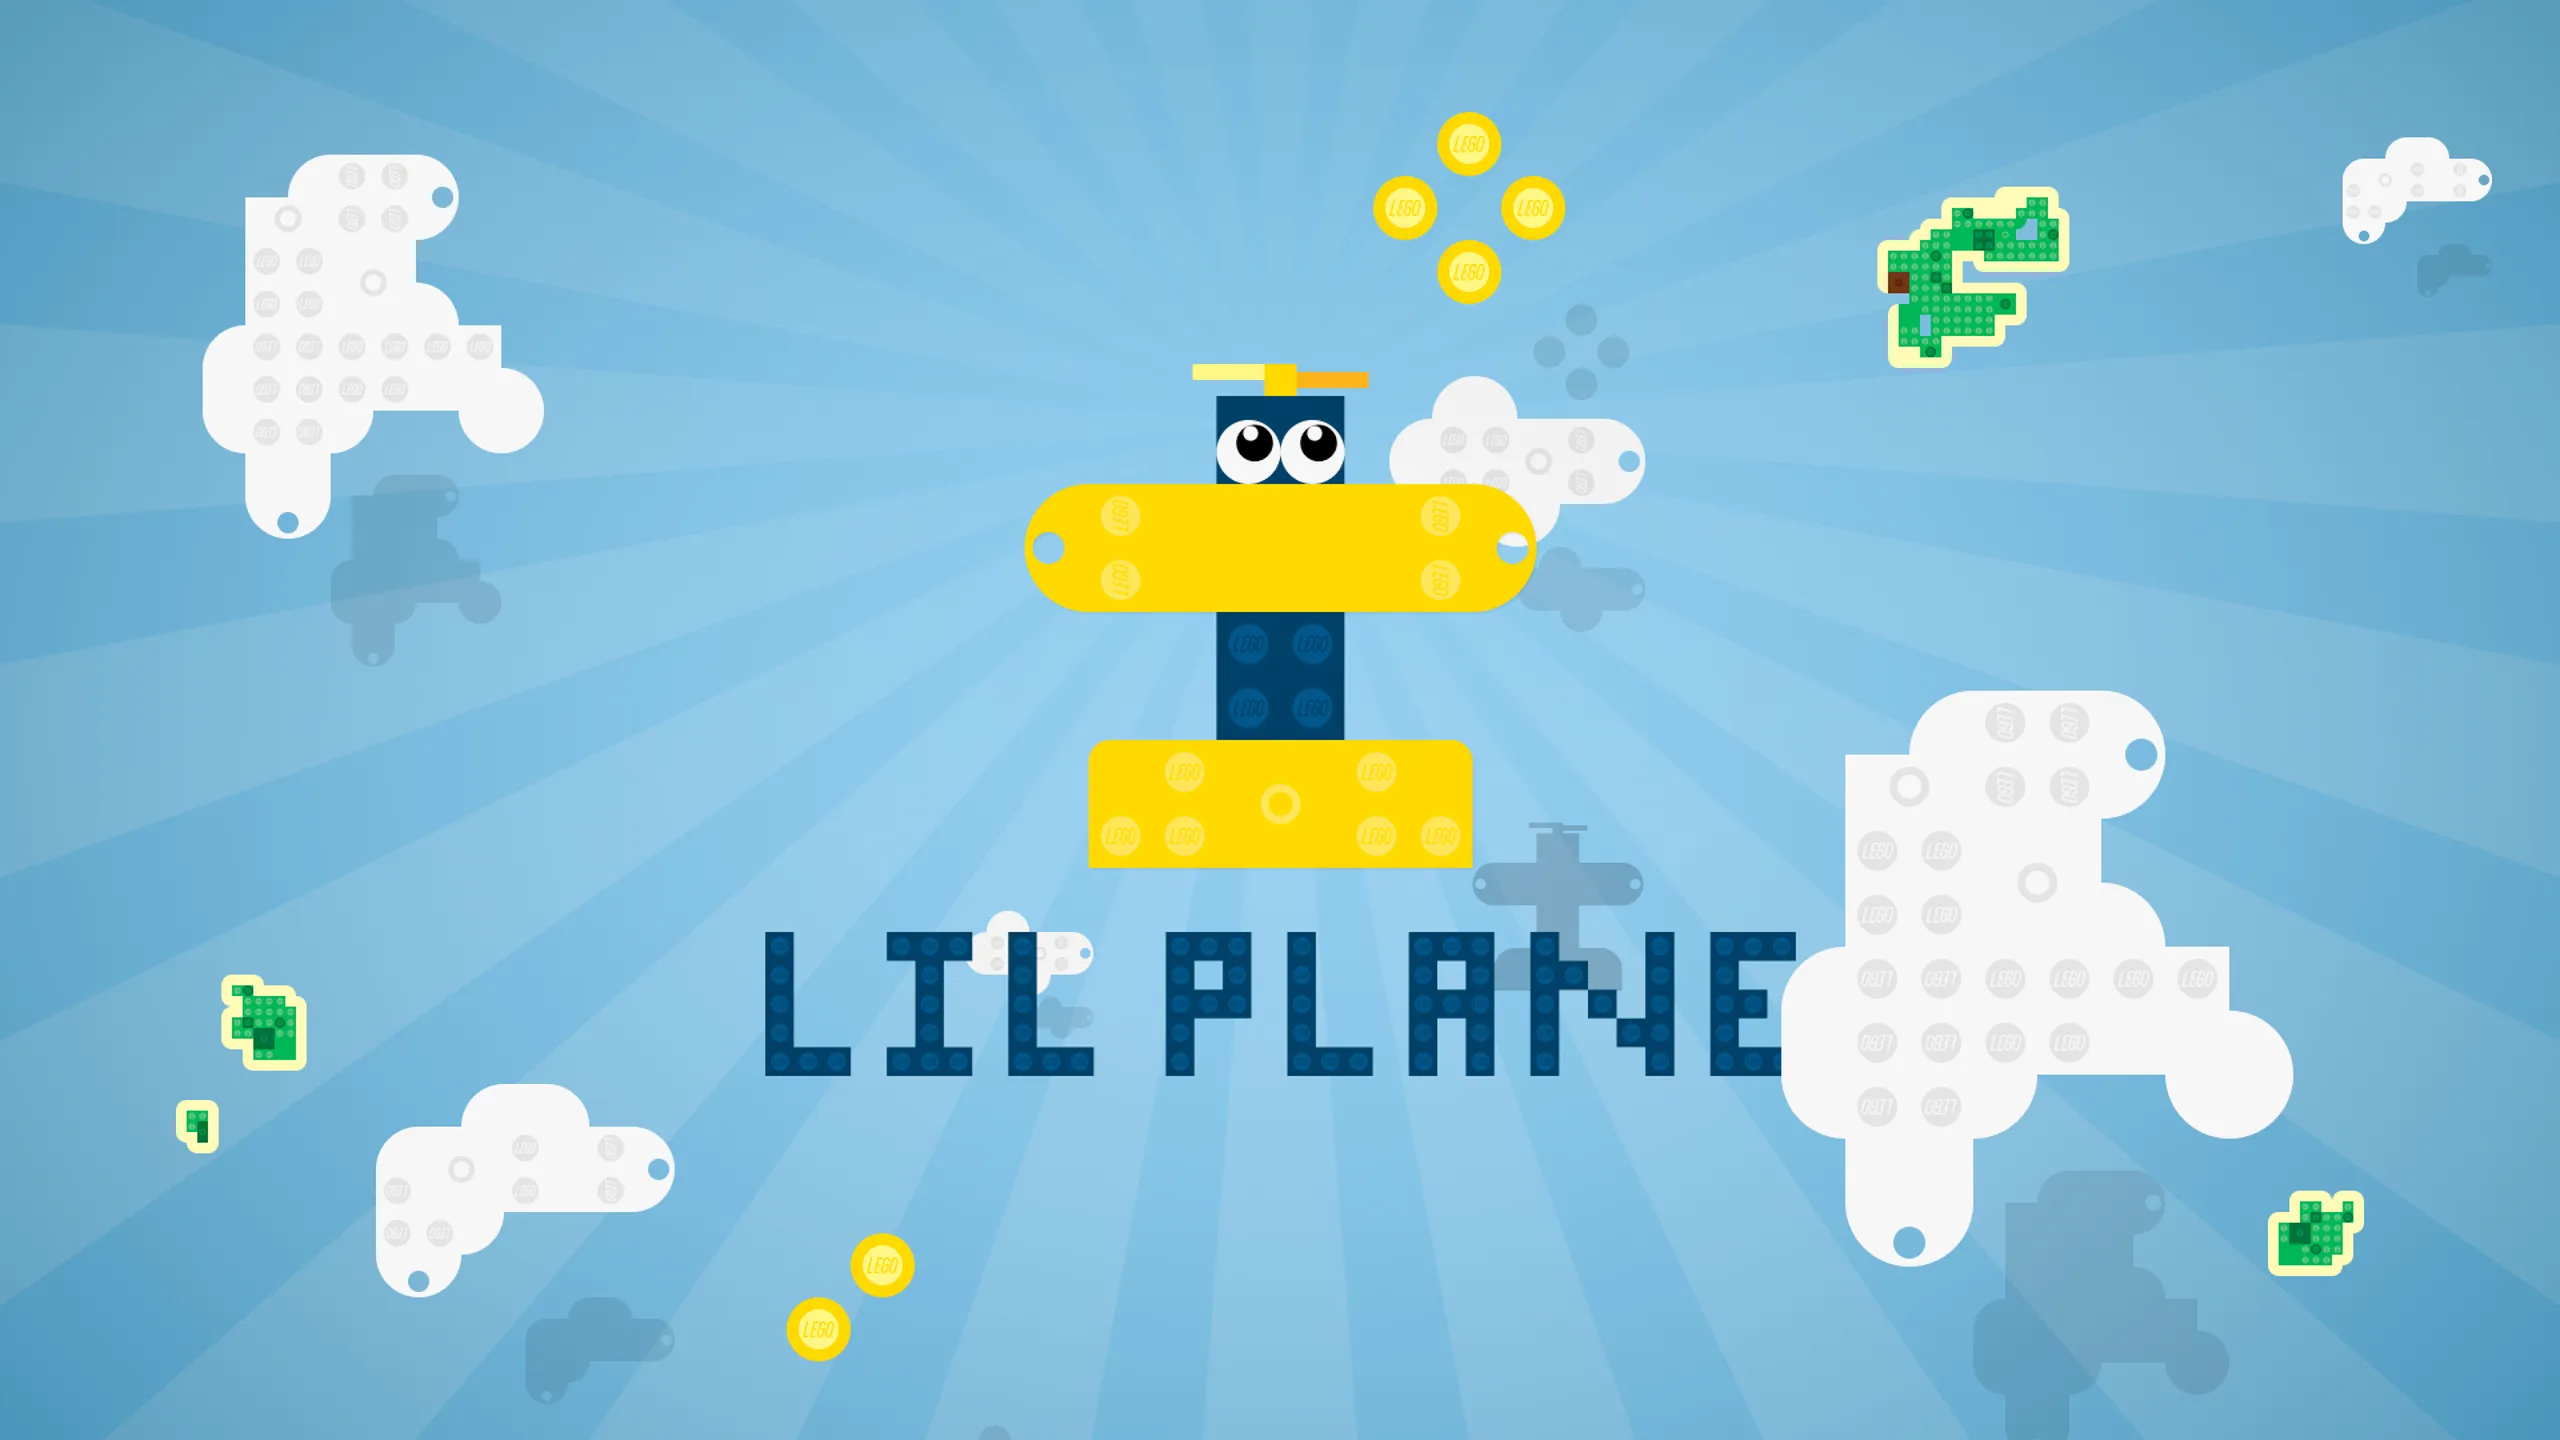 This new game lets you play Doodle Jump as DC Super Heroes beginning with  Batman